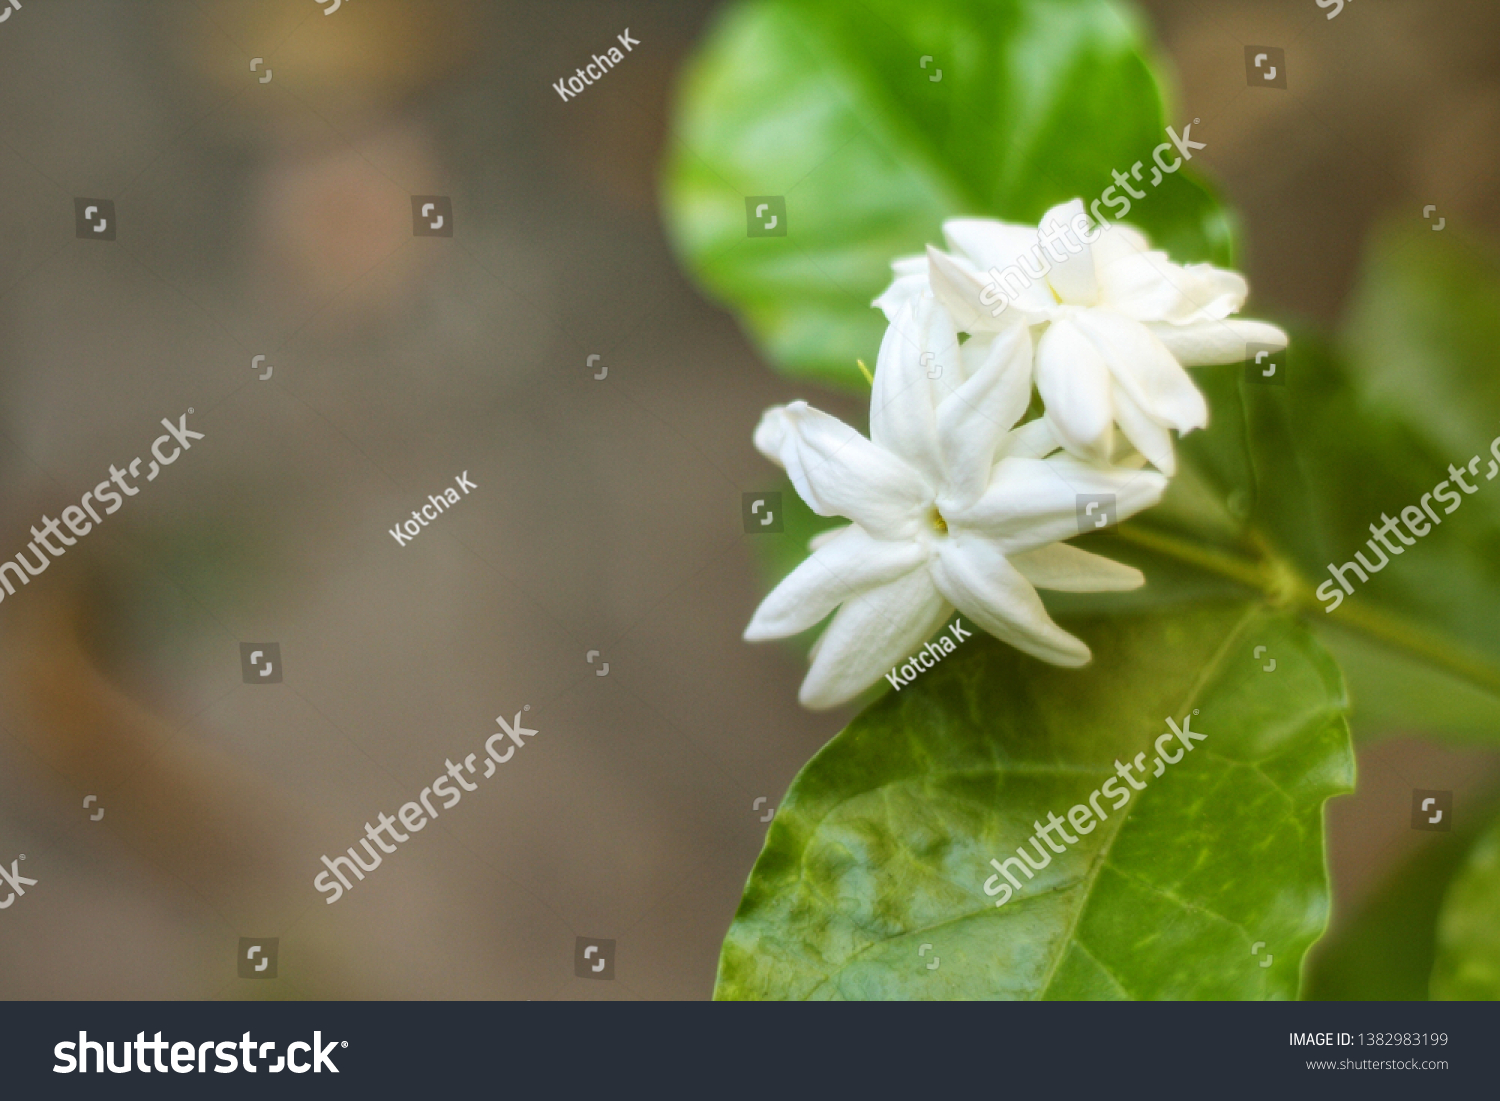 Blooming Jasmine(Jasminum sambac) flower bouquet on its tree in the garden with ground background.Have very fresh smell.Blooming in April.Selective focus.Selective focus. #1382983199